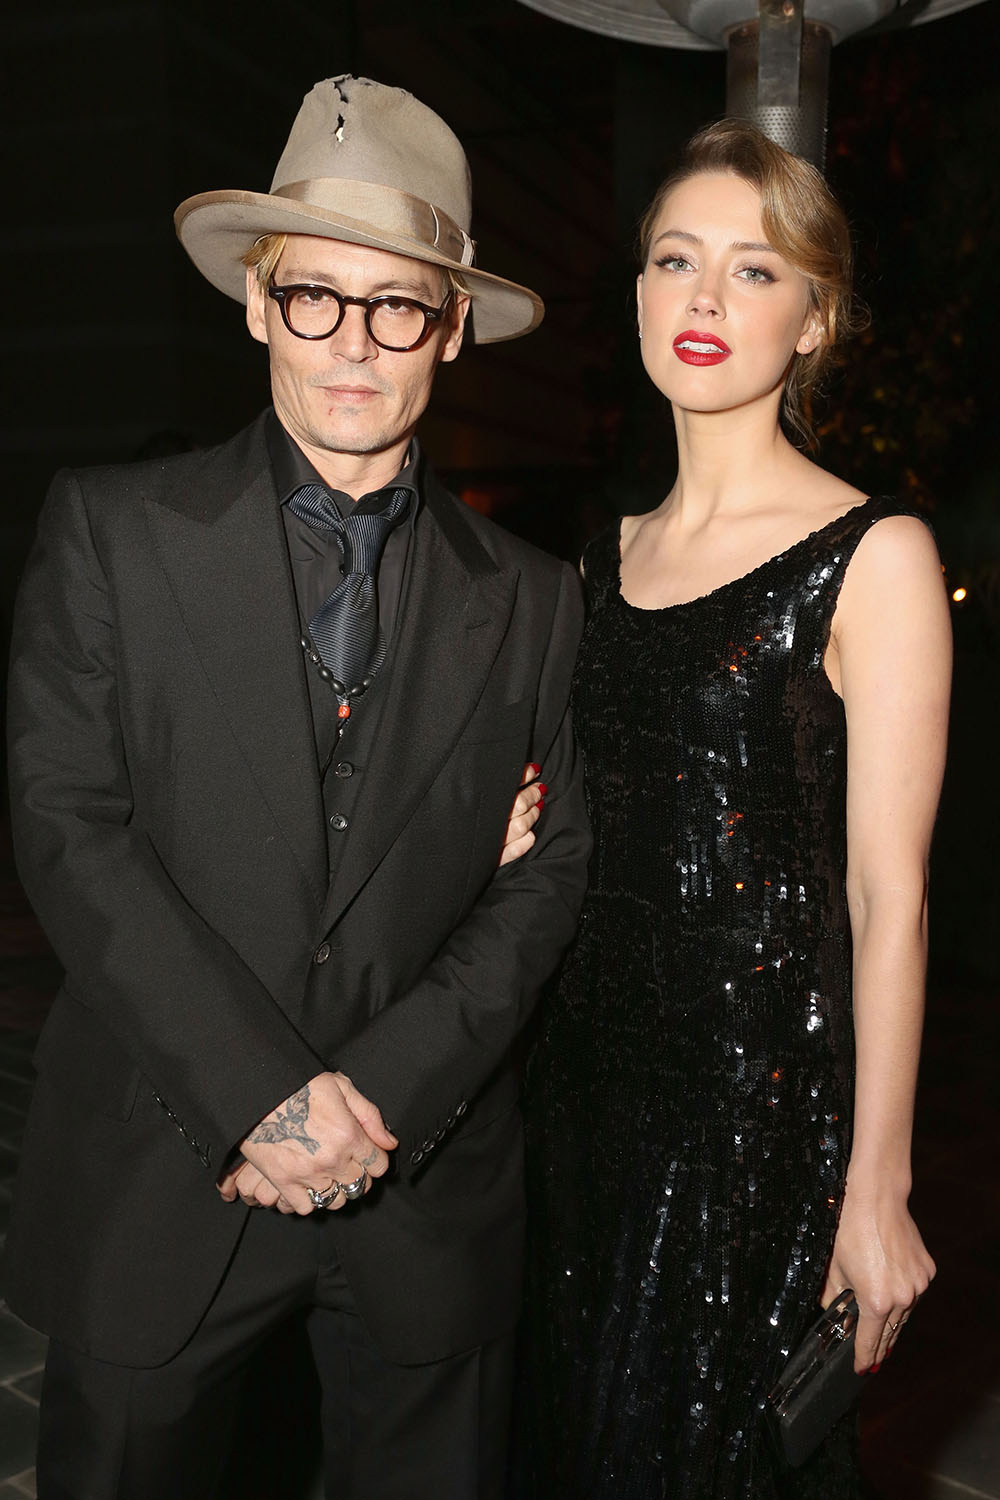 The newly engaged couple attend the Art of Elysium's 7th Annual Gala in January, 2014.